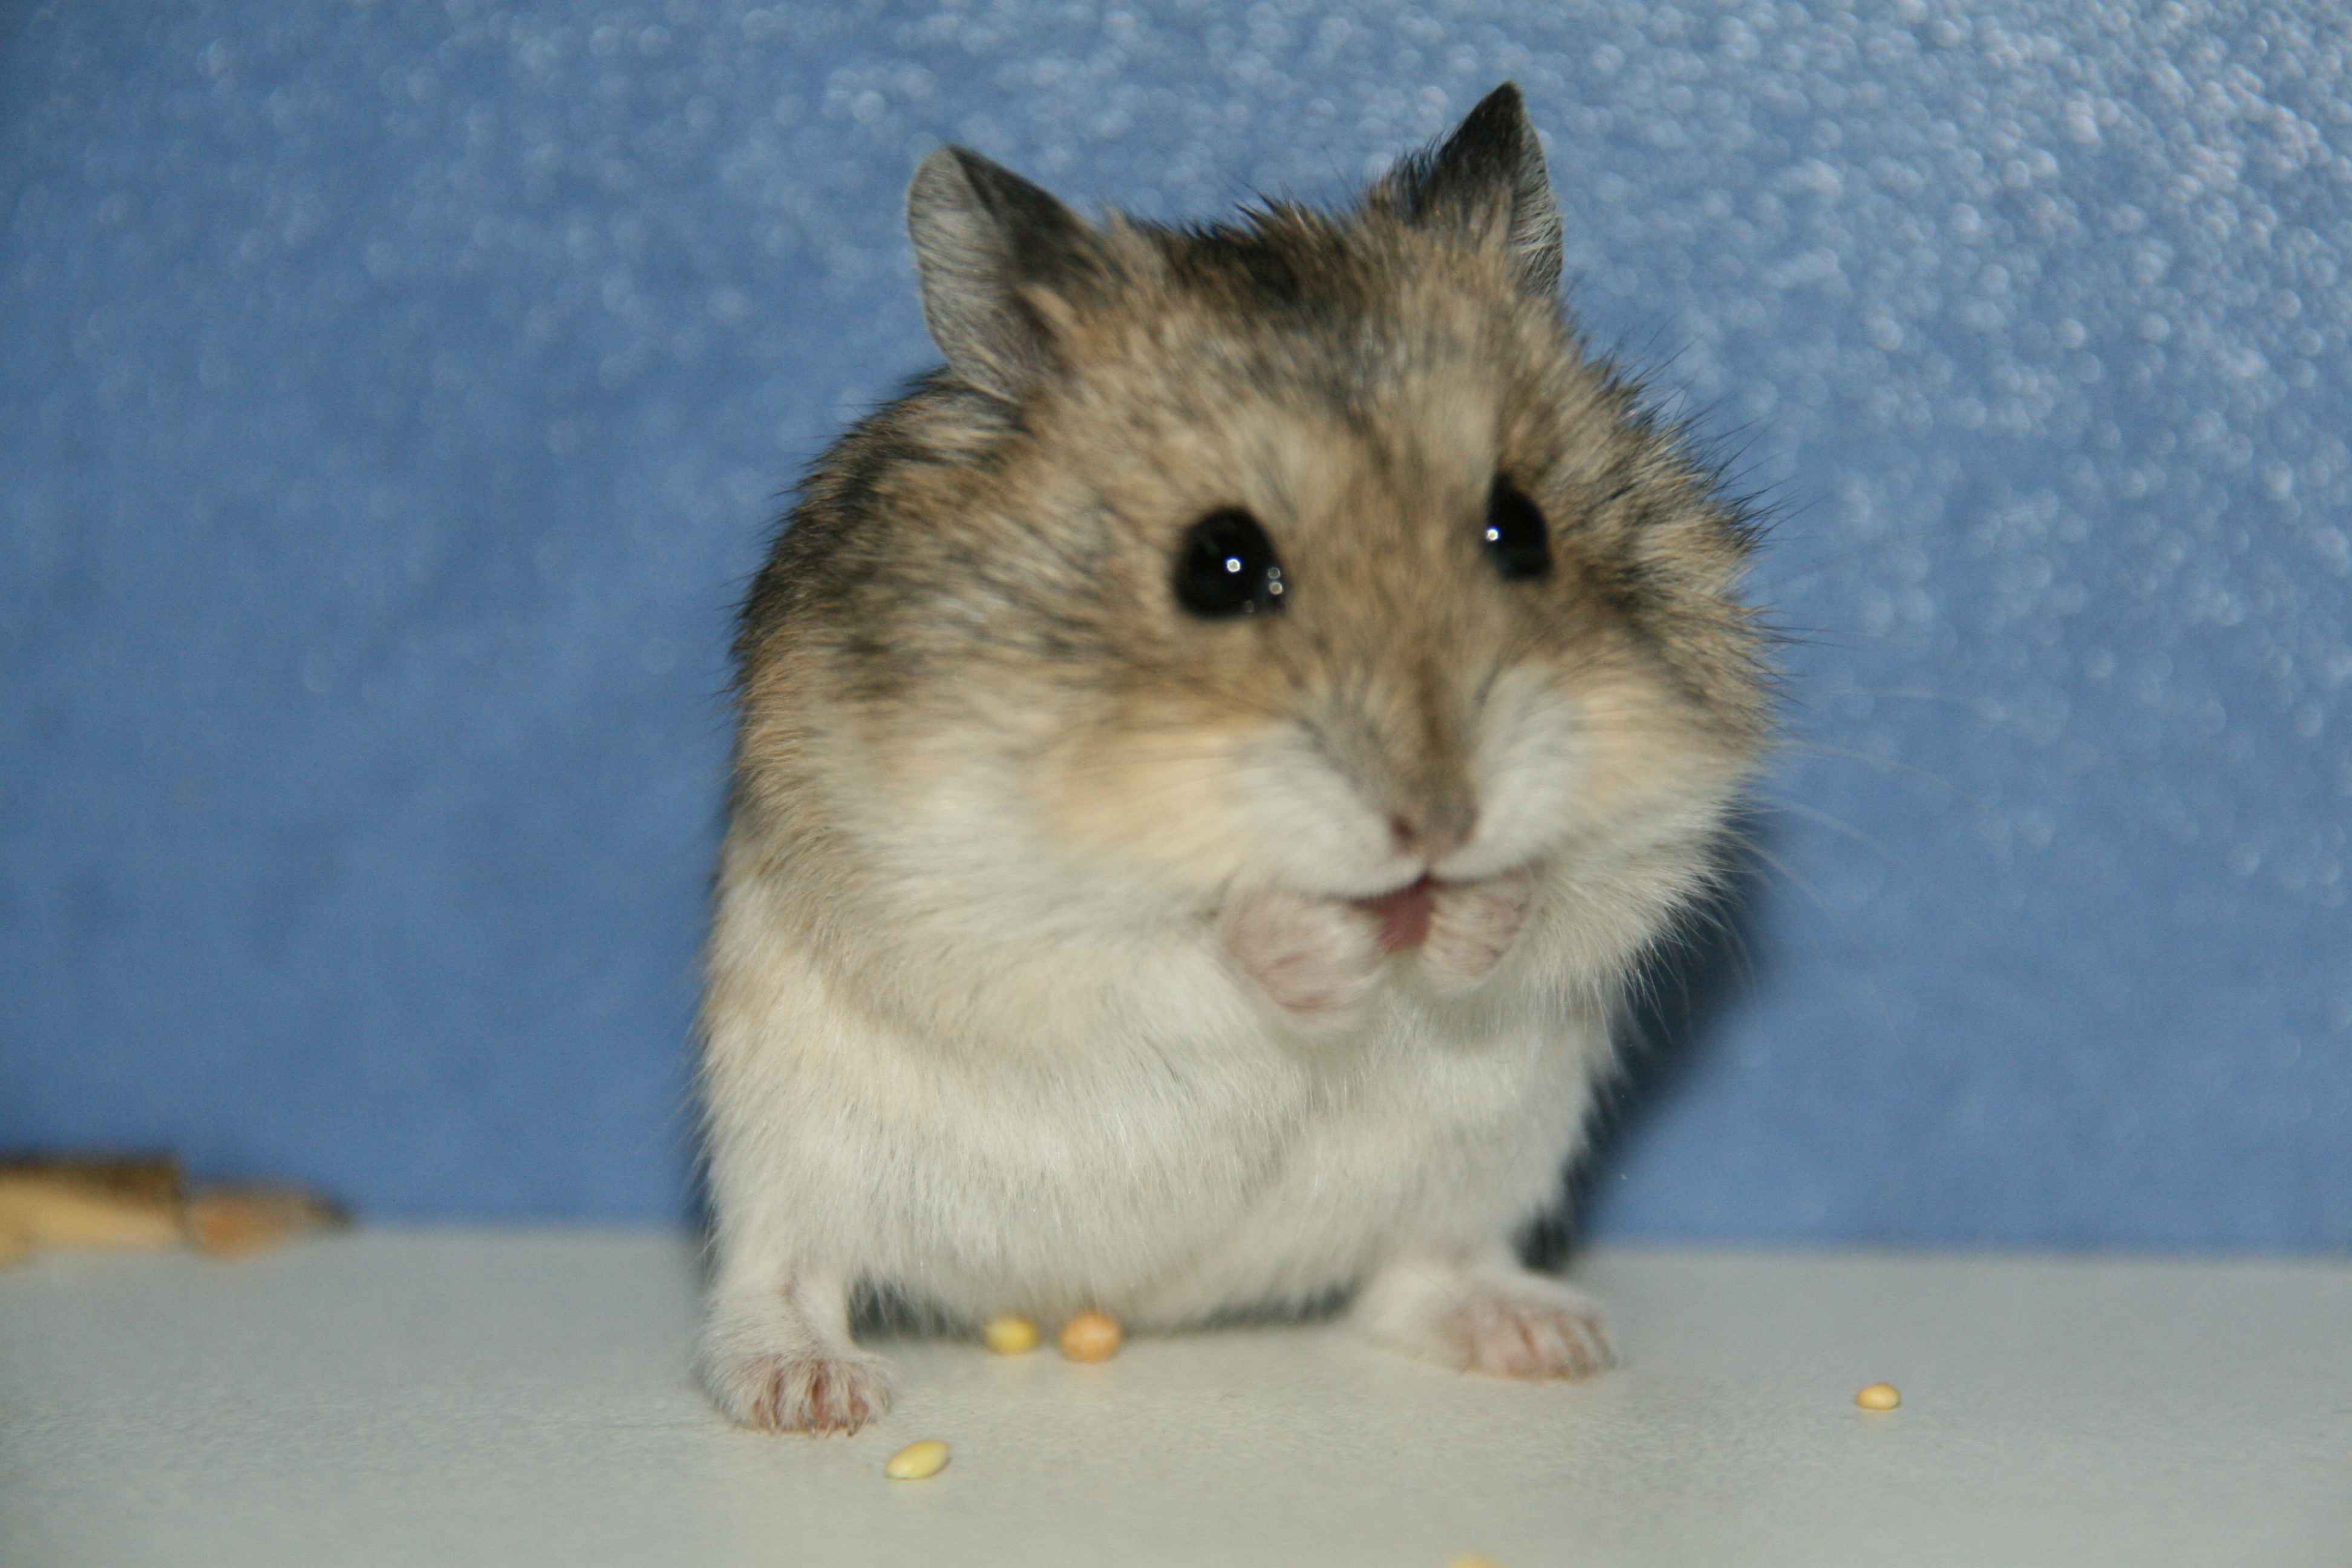 Features of the Syrian hamster's lifestyle